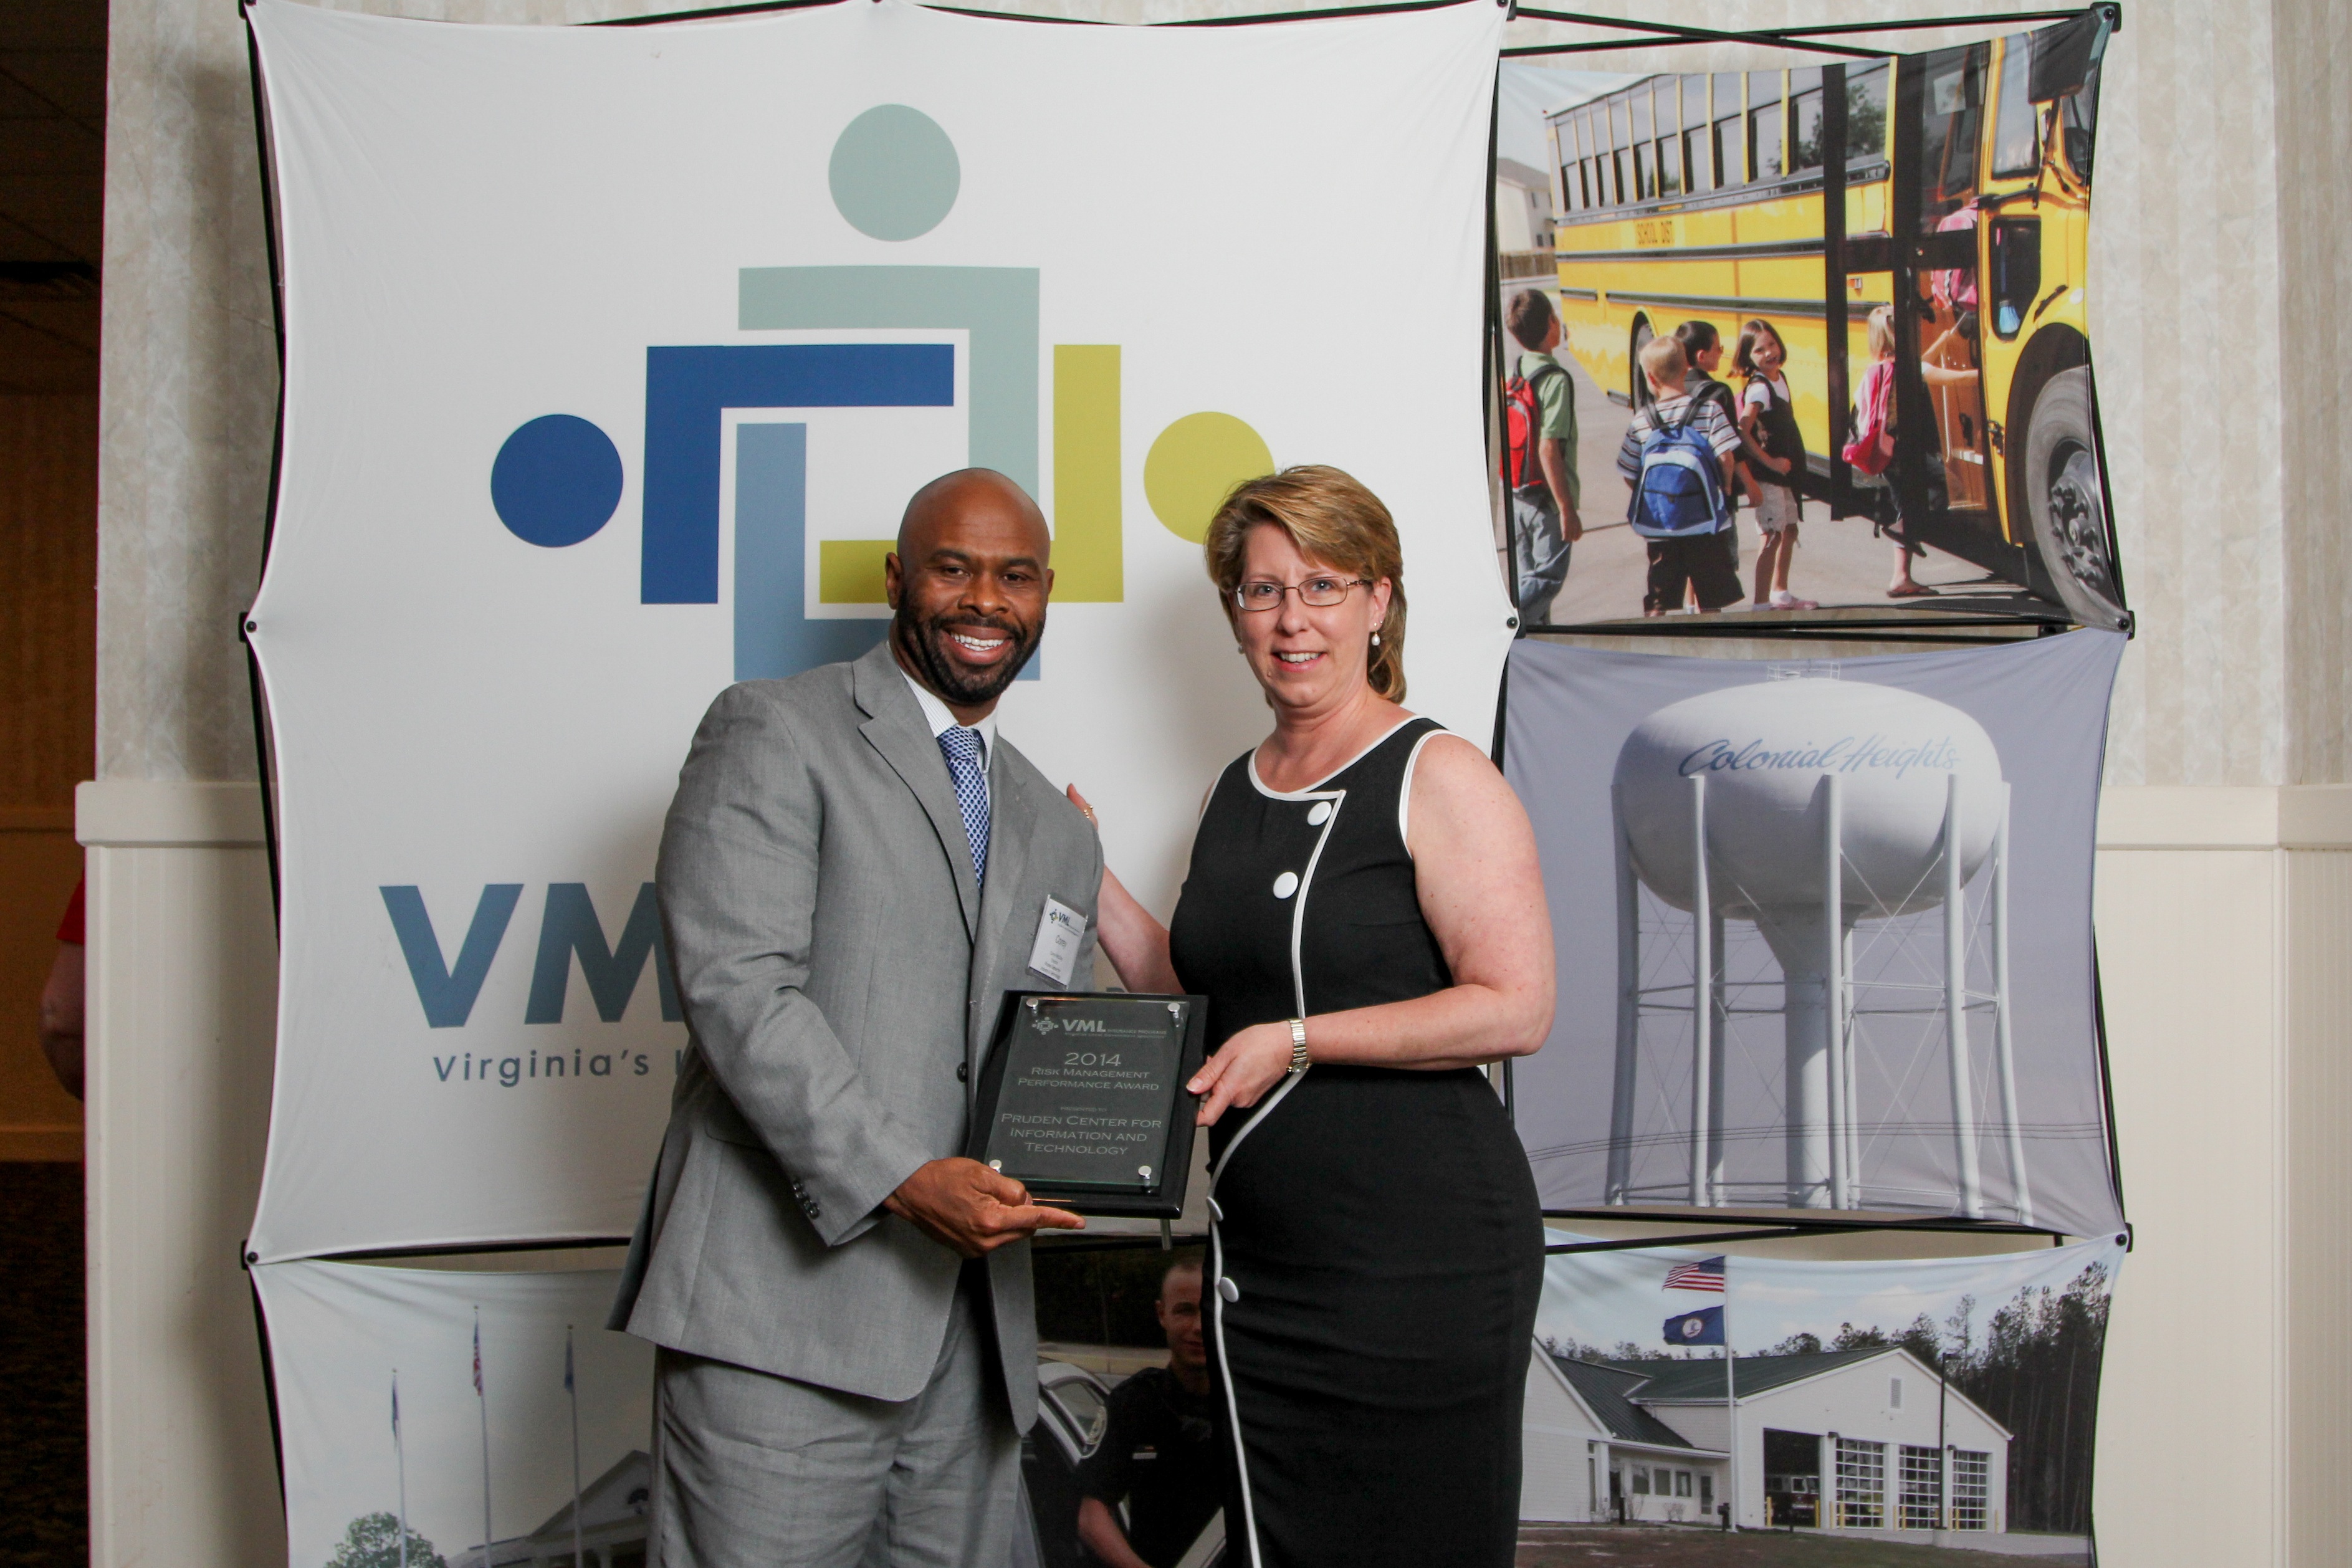 (L to R): Pruden Center for Industry and Technology Director Corey McCray and VMLIP Members Supervisory Board Chair Karen Pallansch